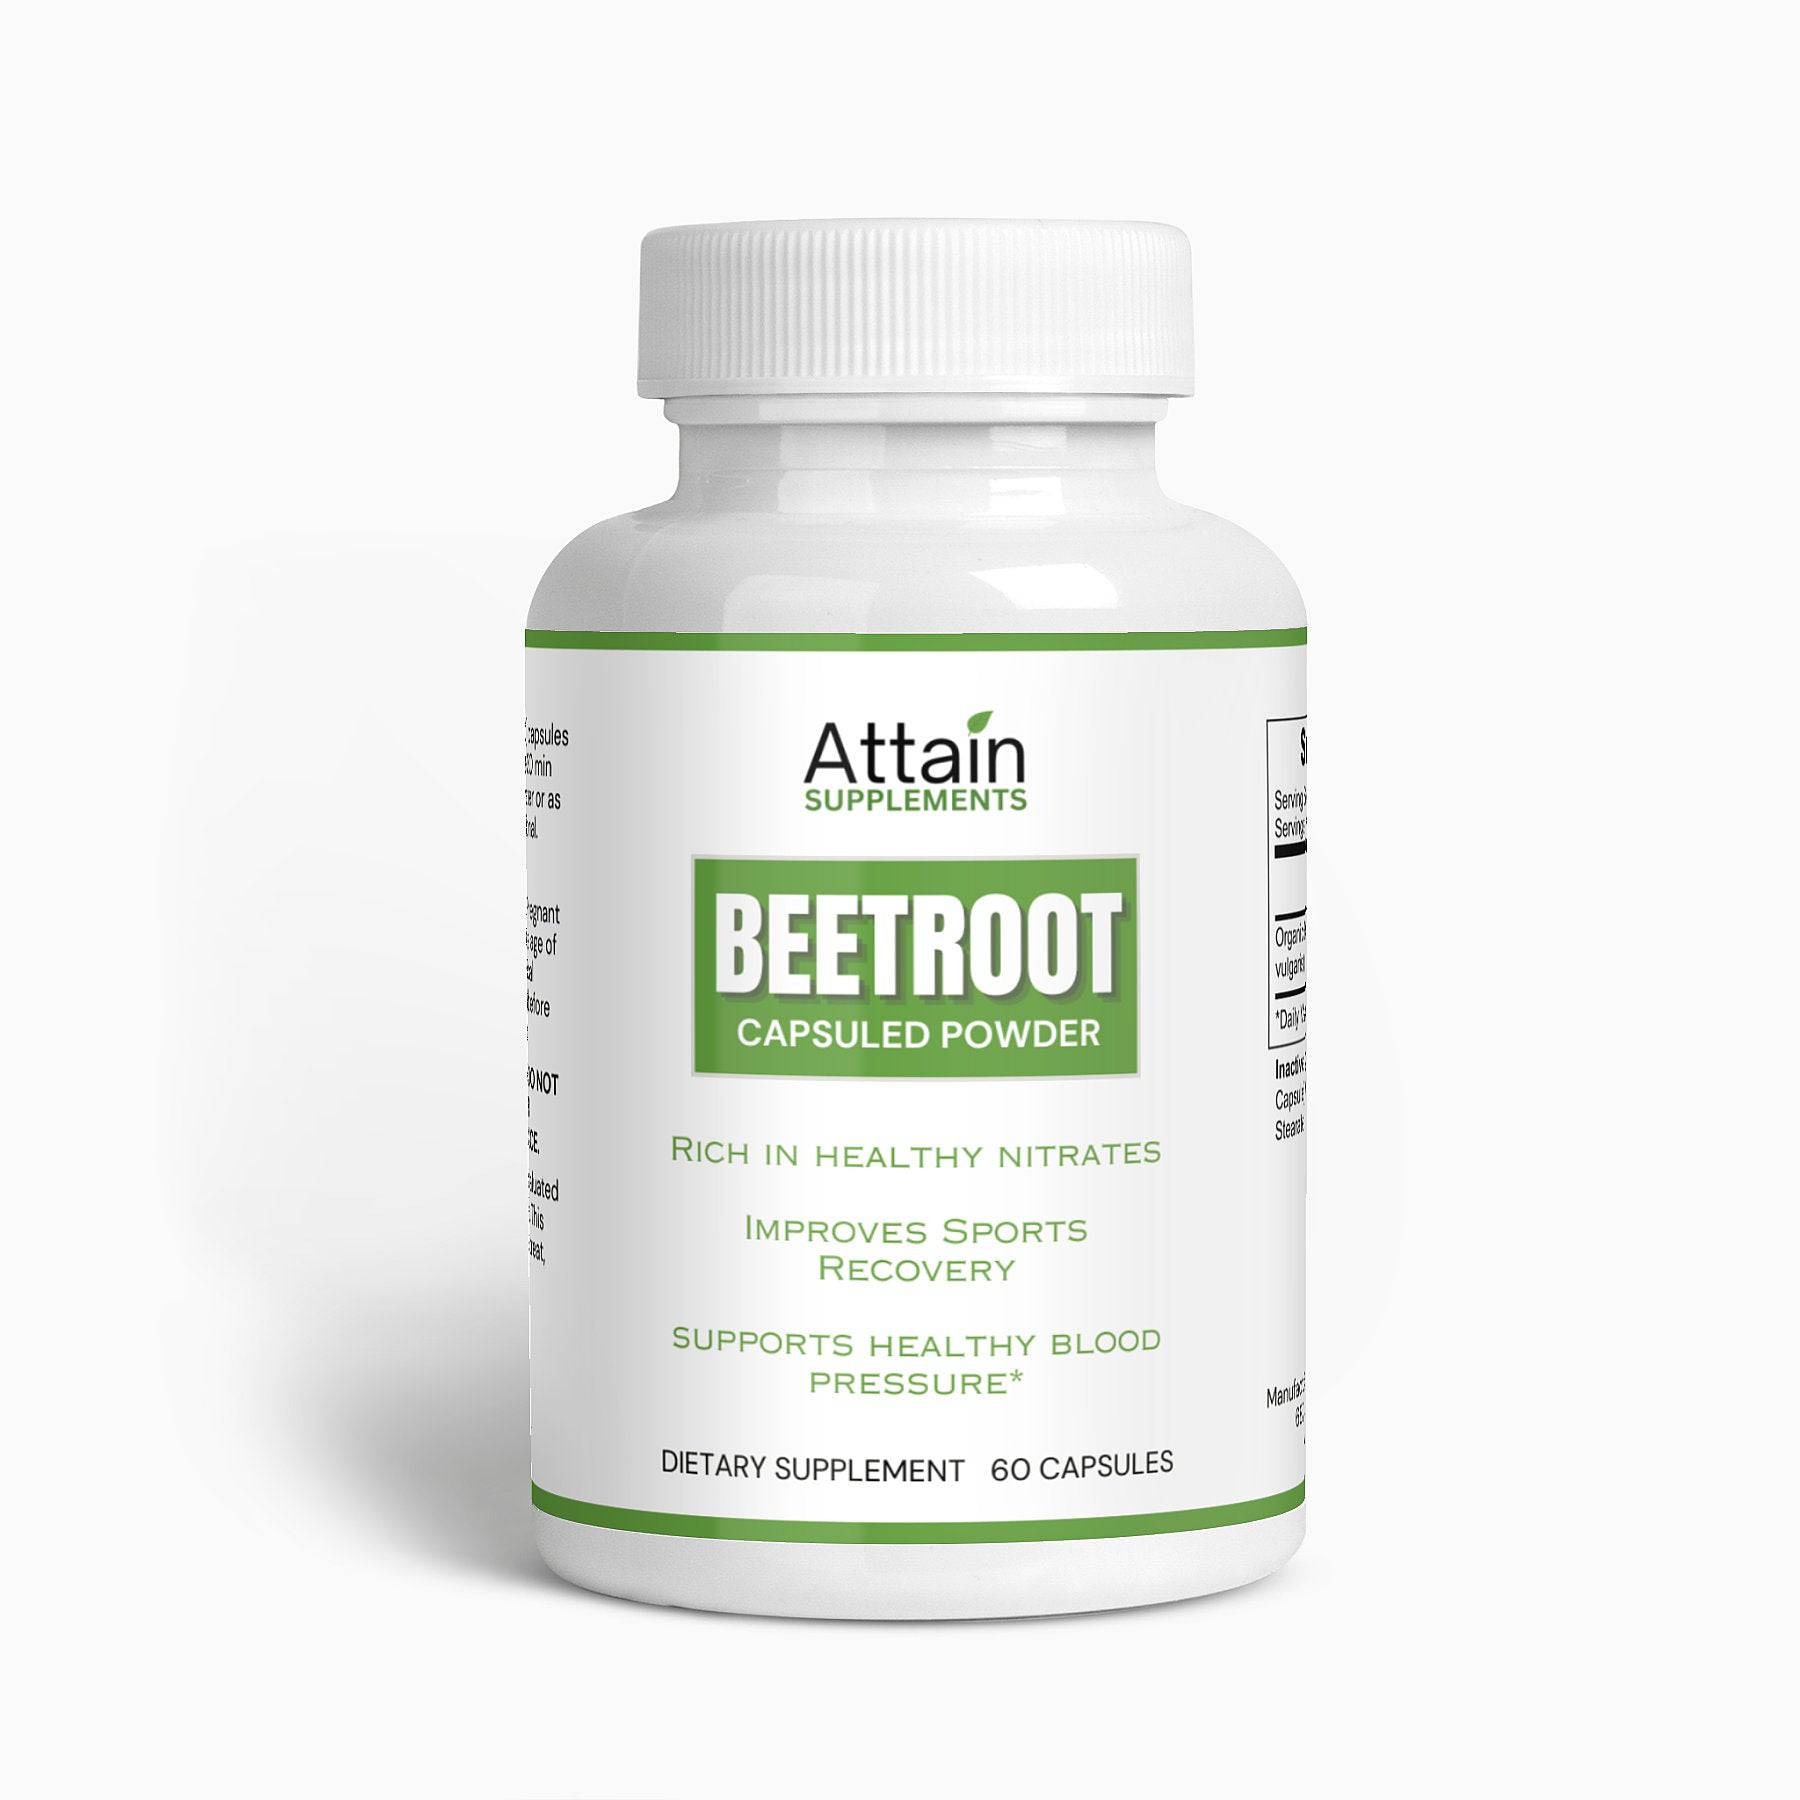 Beetroot Capsulated Powder in Bottle - Front of beetroot powder capsules